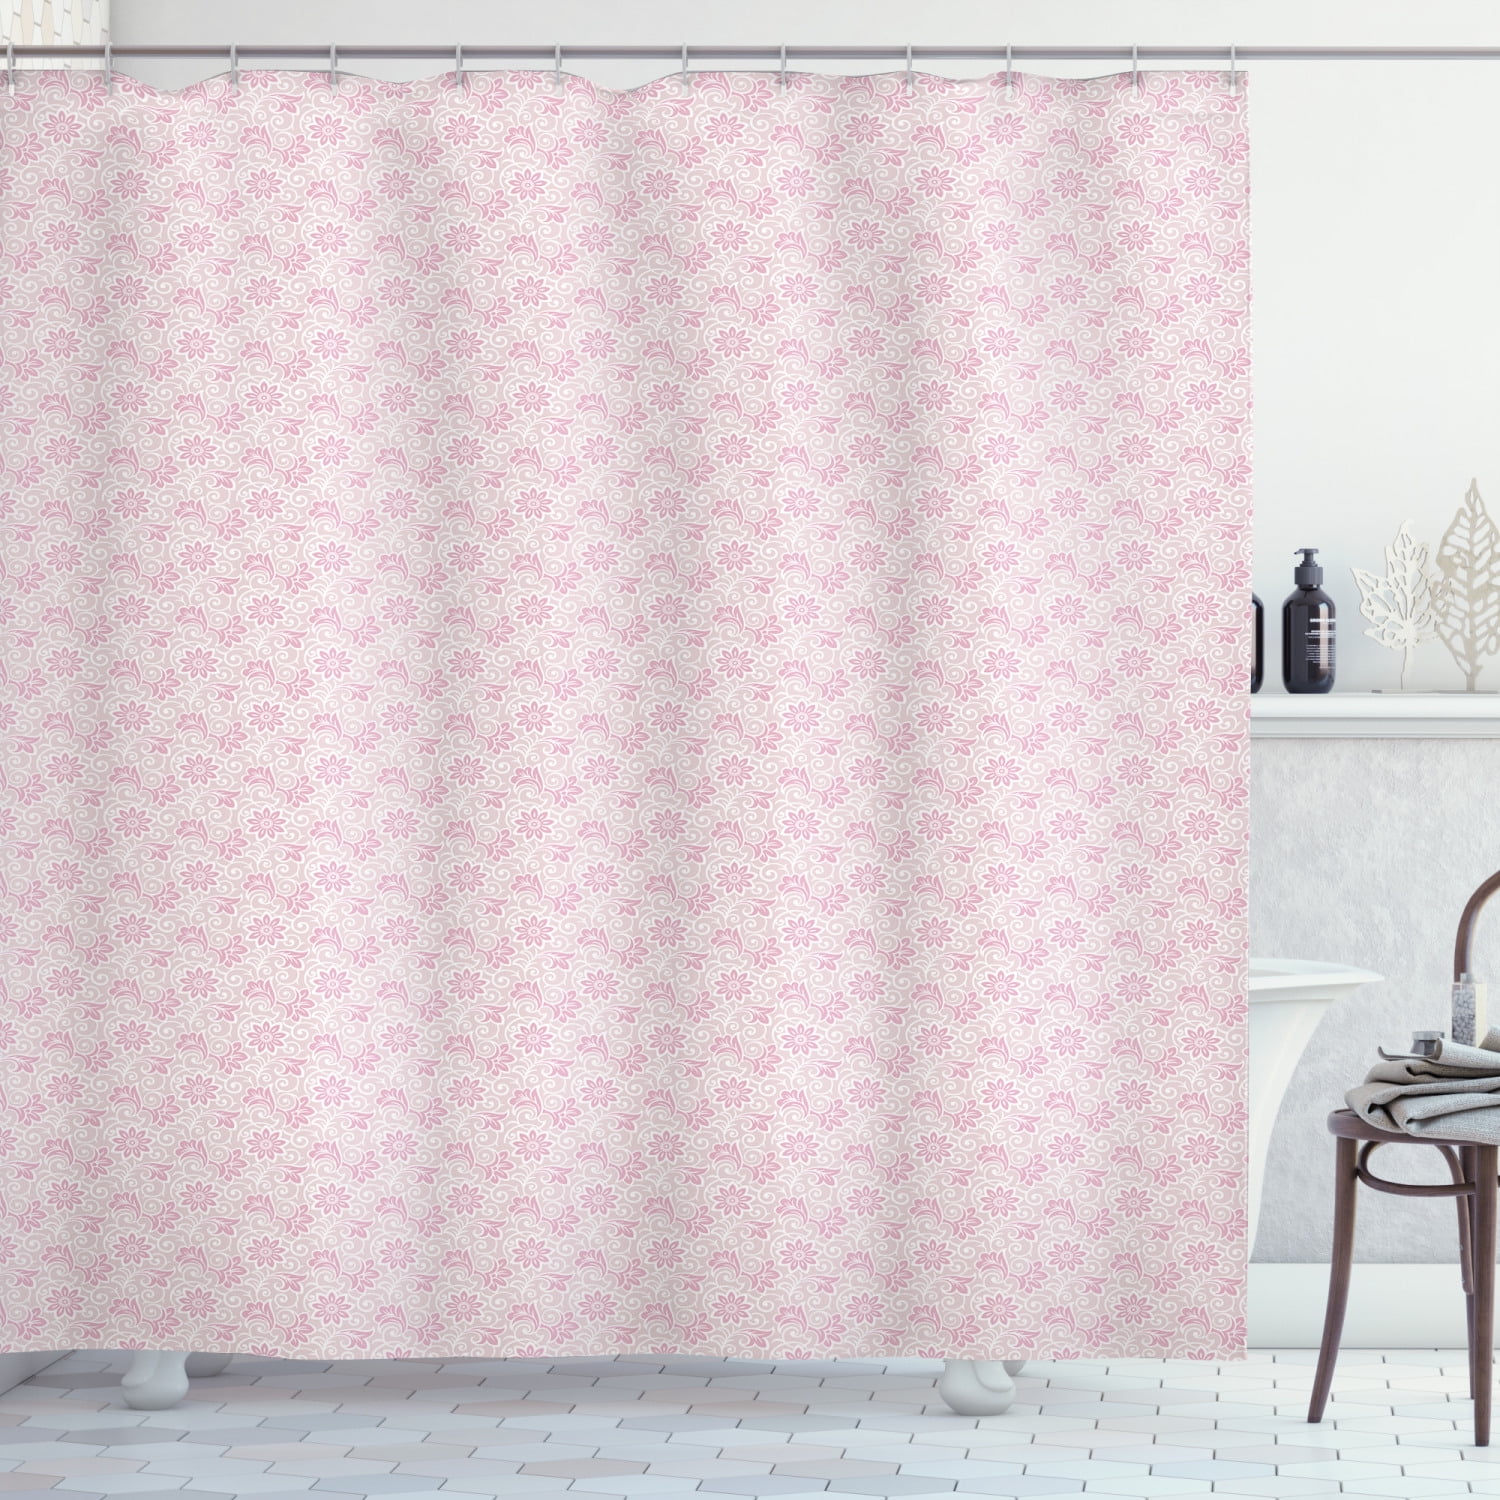 Details about   Rose Flowers Printed Arts Waterproof Polyester Fabric Bathroom Shower Curtain 